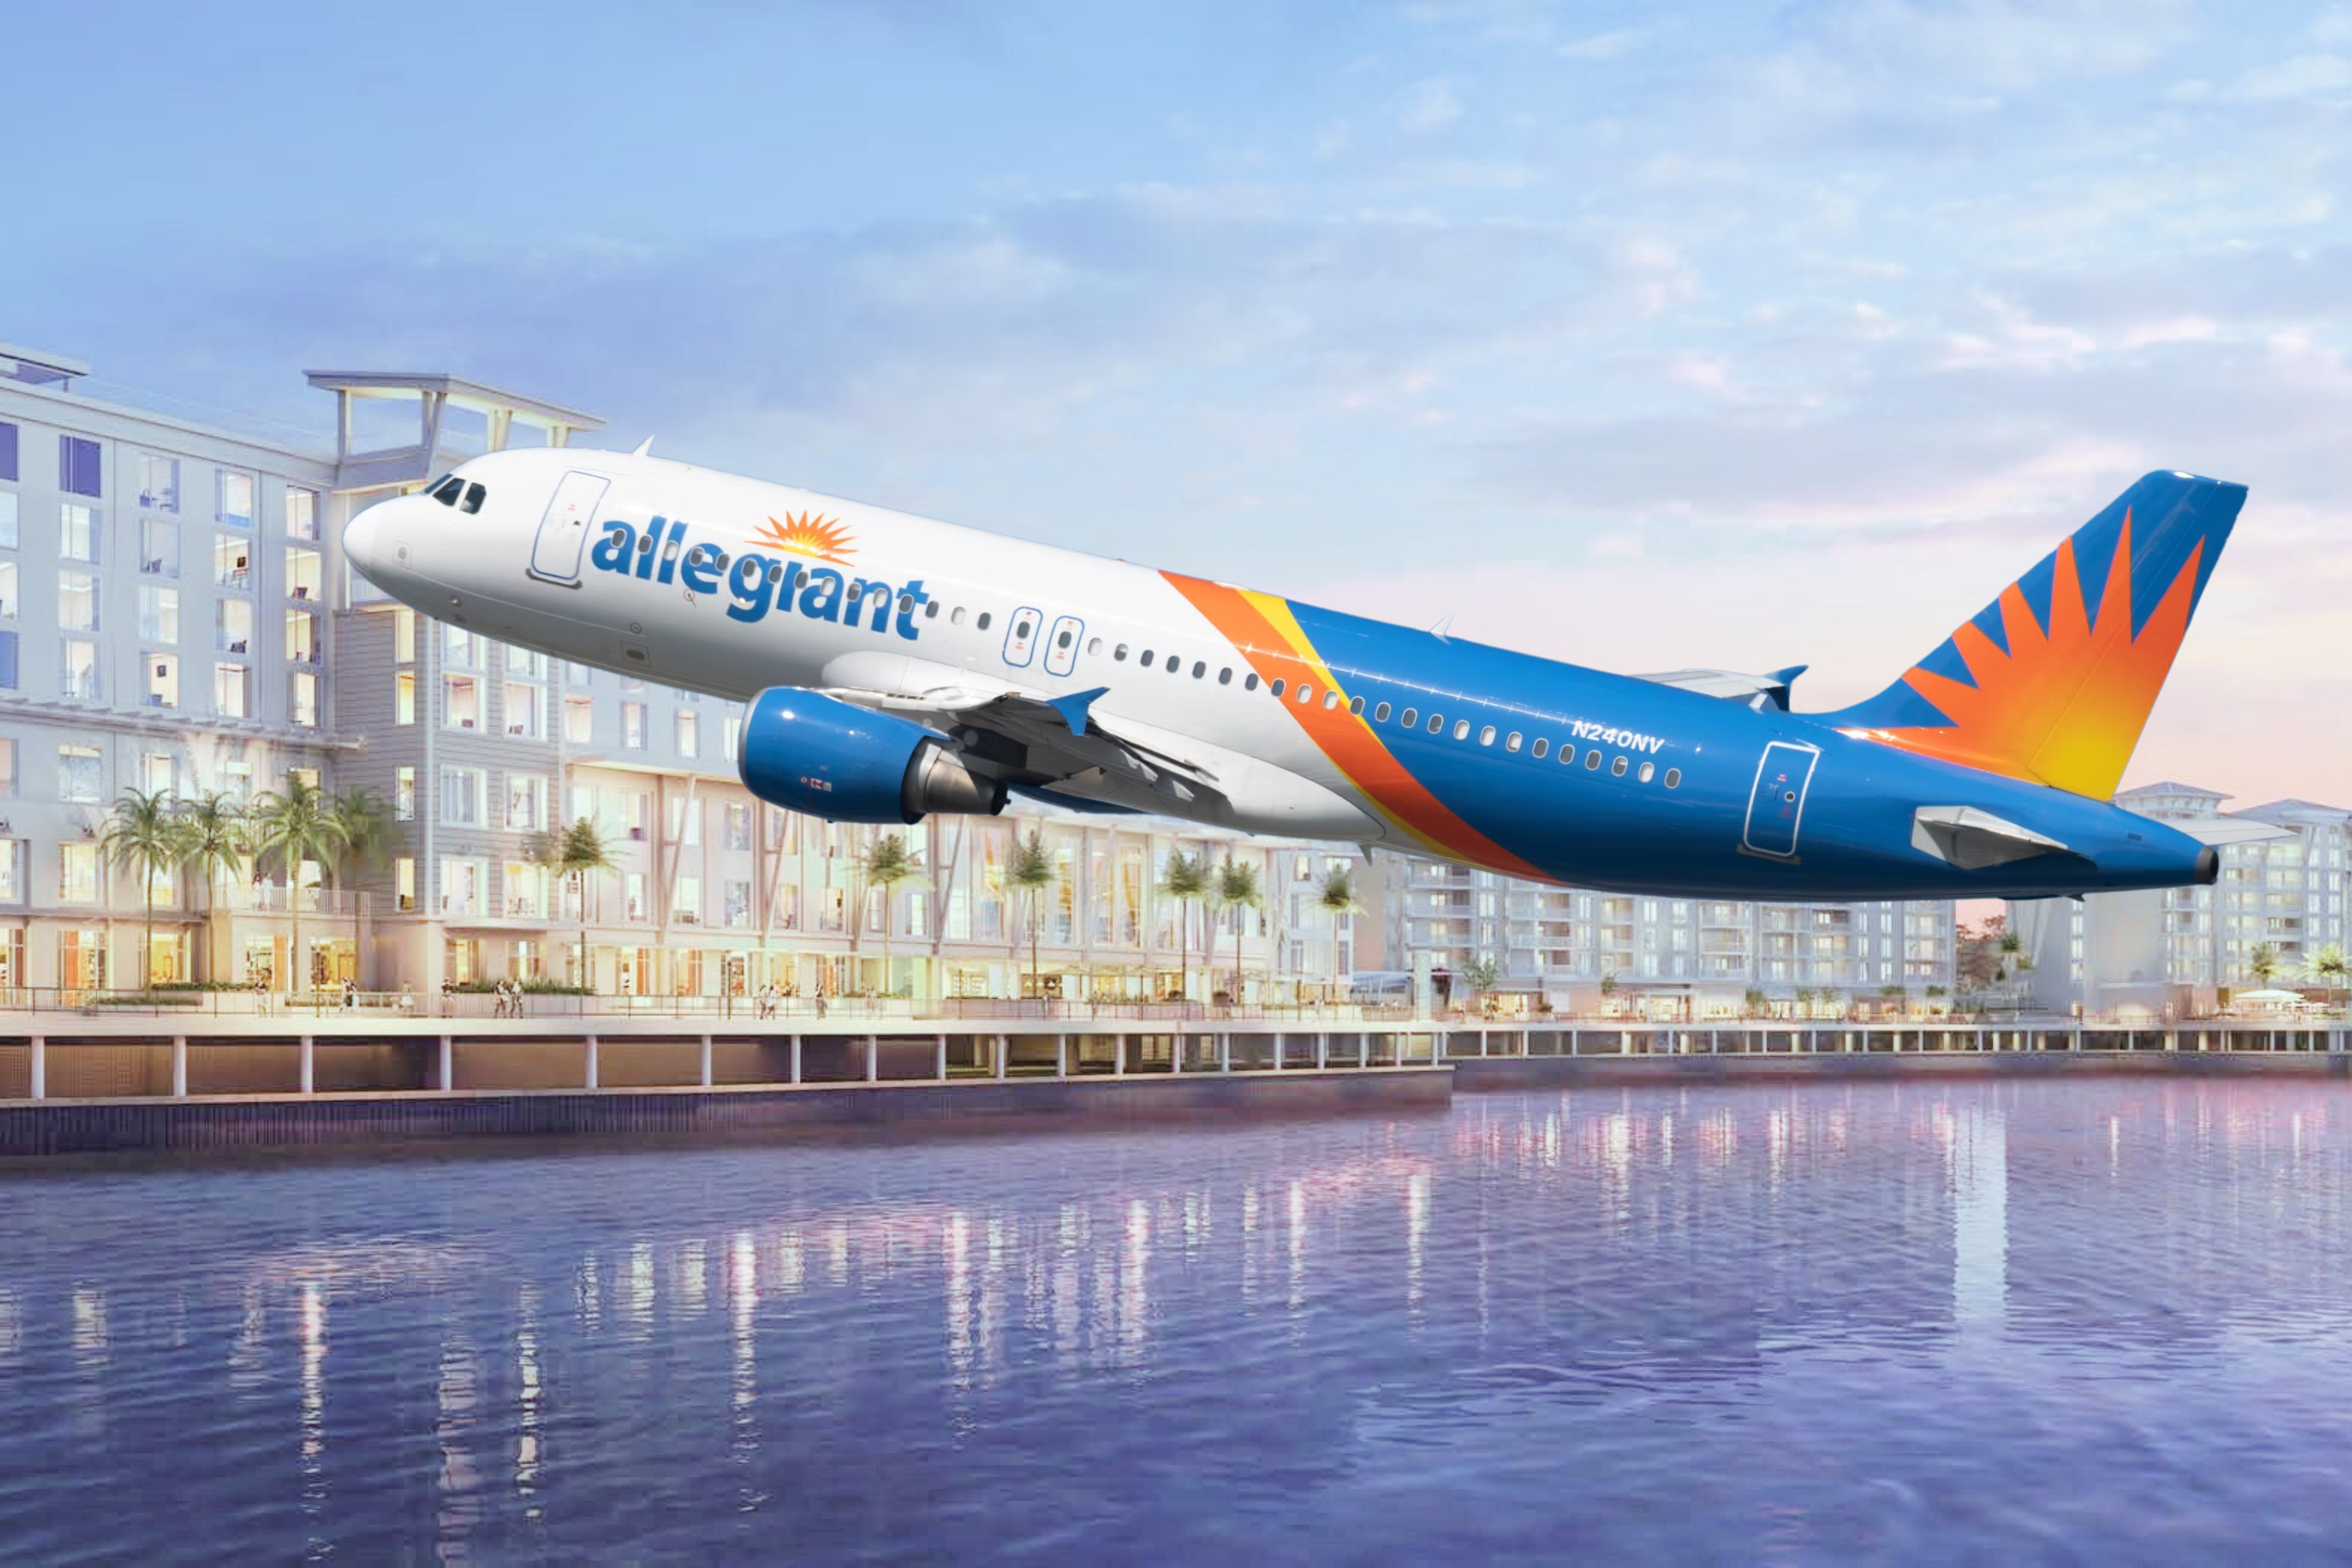 Was Building The Sunseeker Hotel The Craziest Thing Allegiant Air Ever Did?